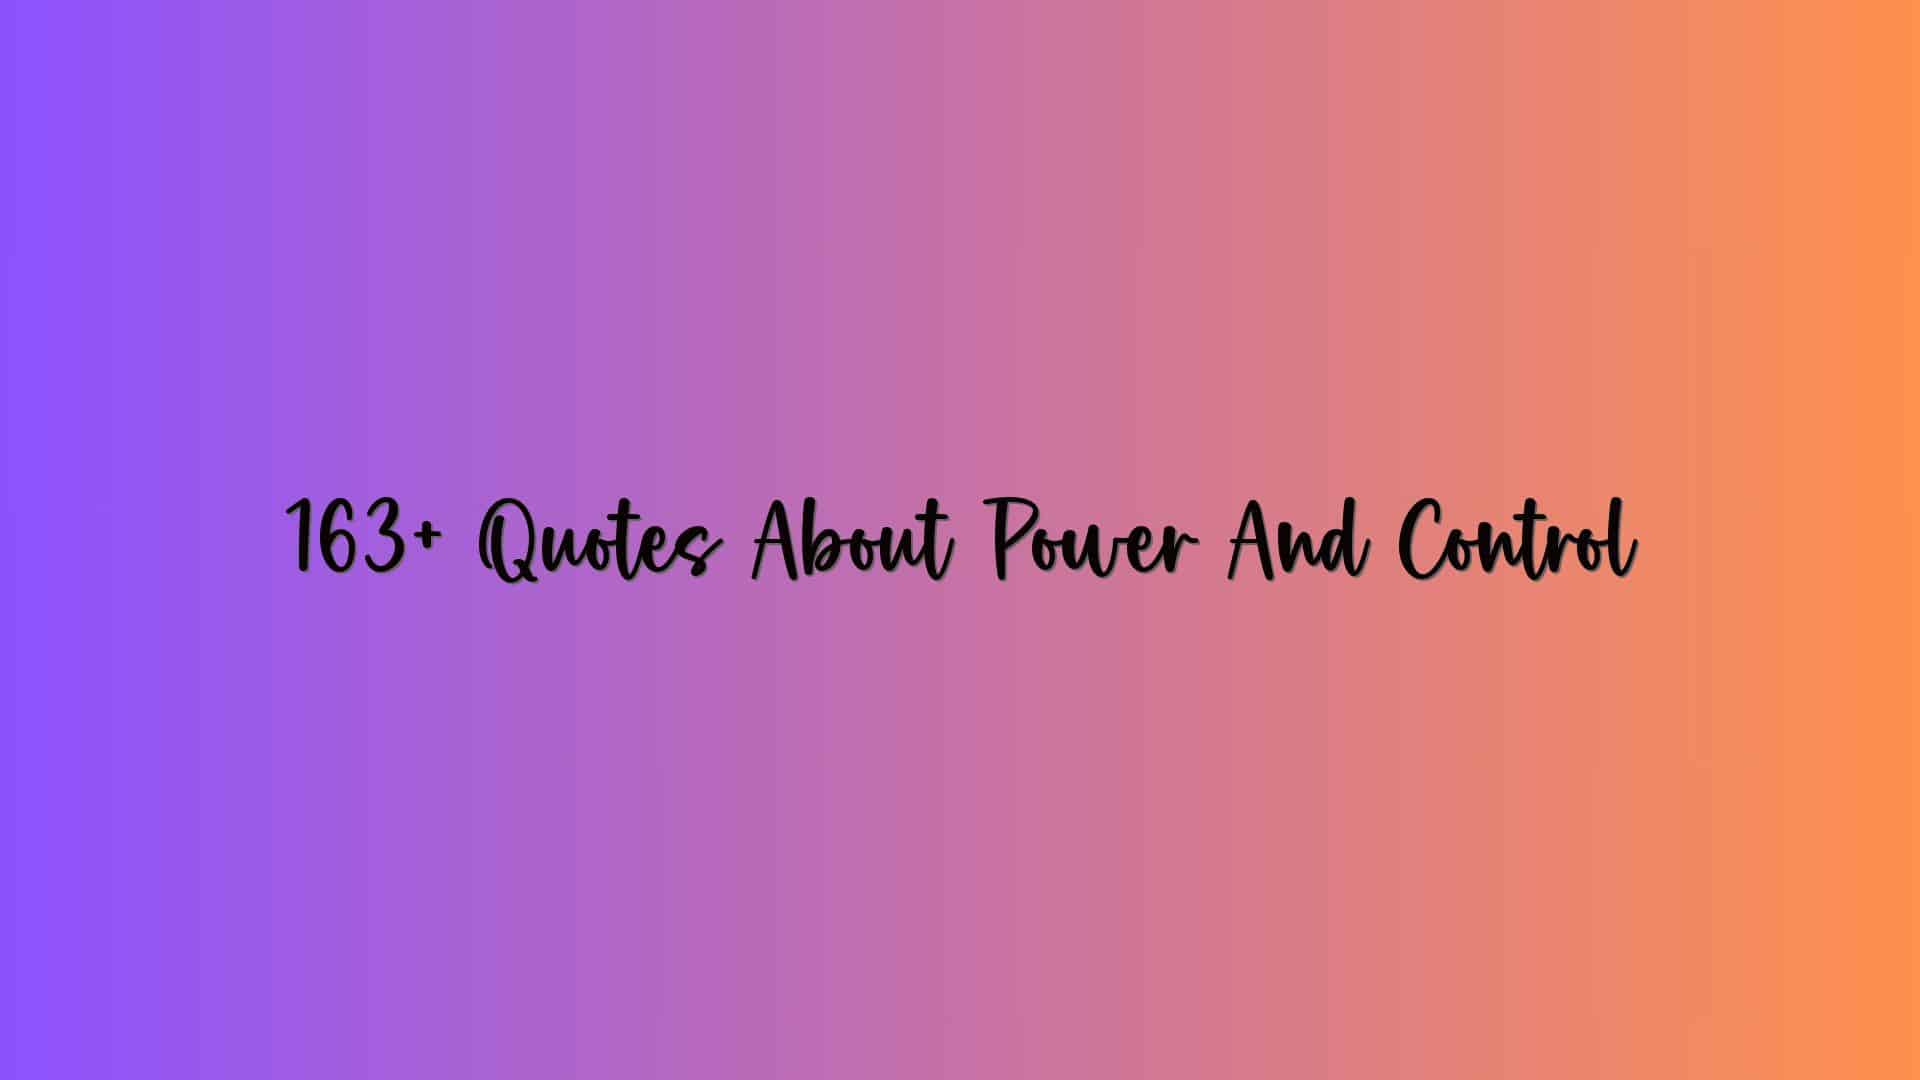 163+ Quotes About Power And Control